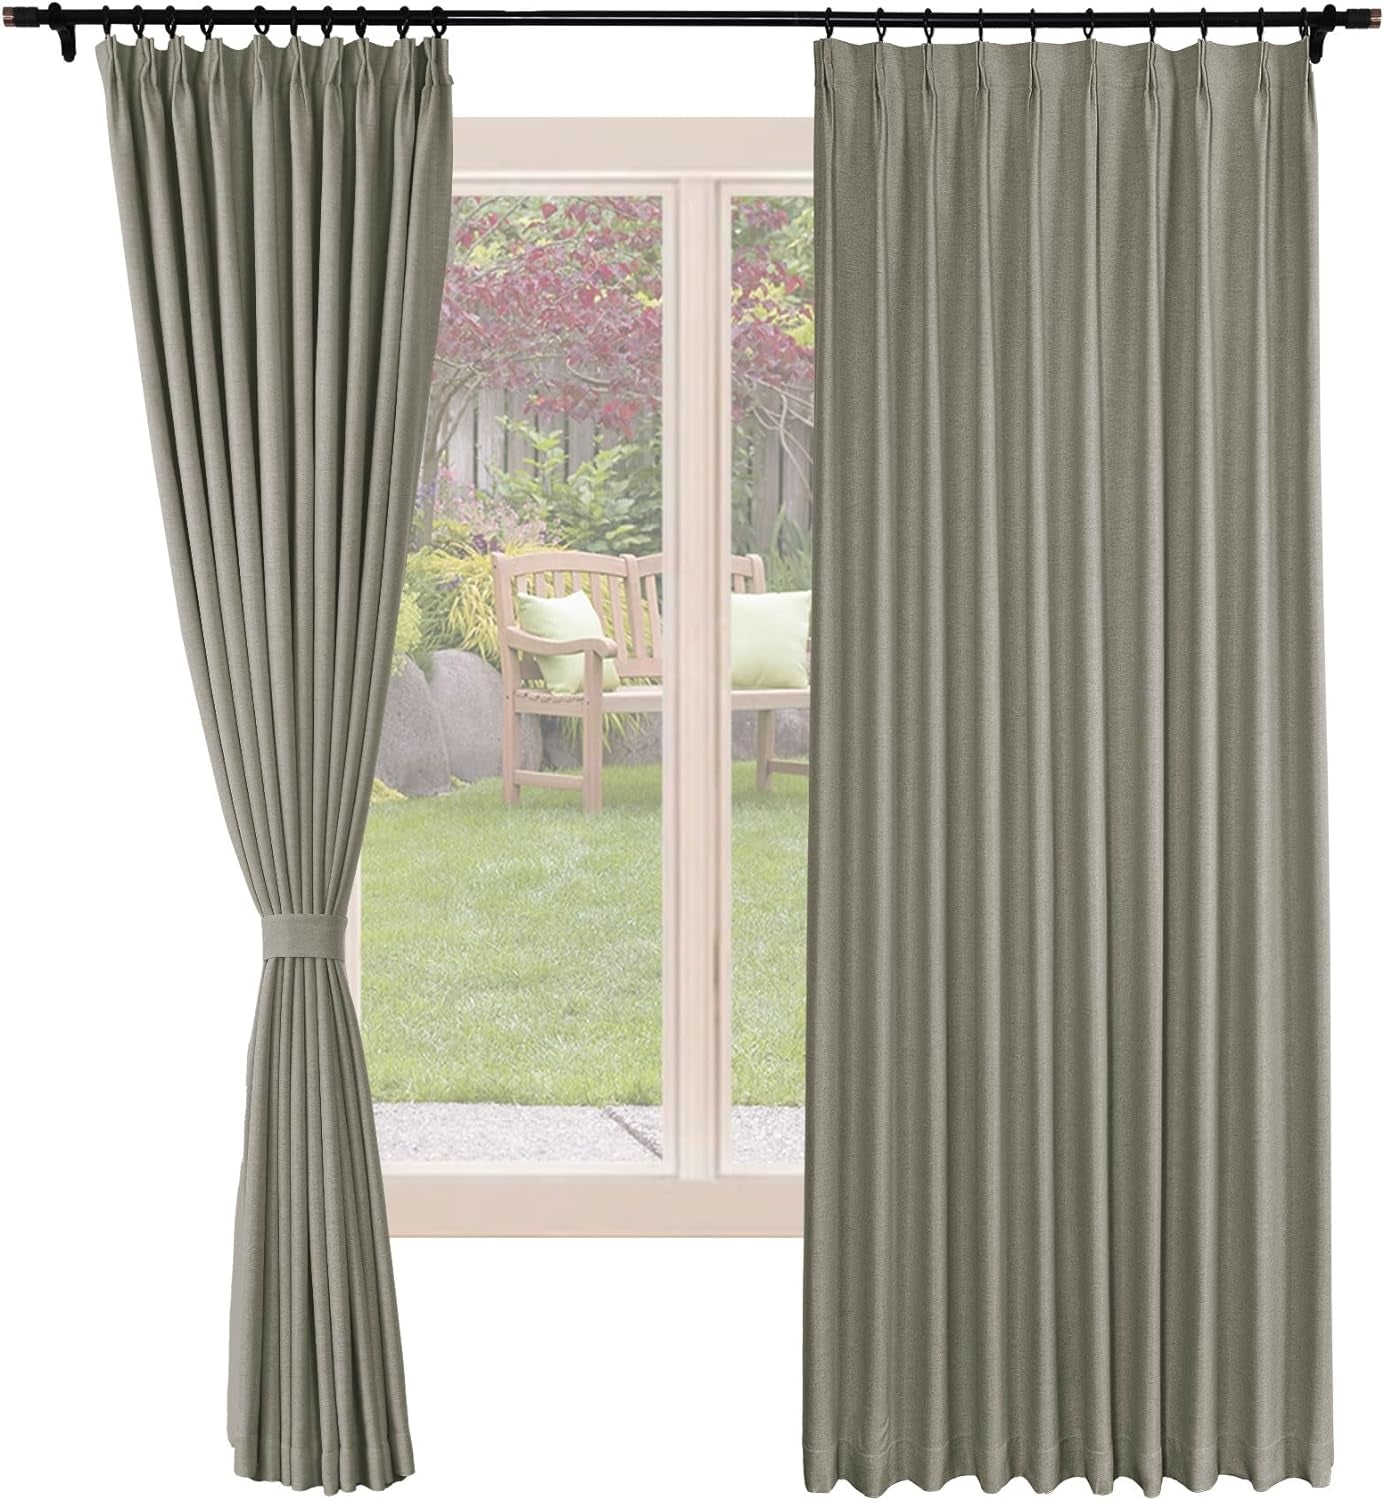 Frelement Blackout Curtains Natural Linen Curtains Pinch Pleat Drapery Panels for Living Room Thermal Insulated Curtains, 52" W X 63" L, 2 Panels, Oasis  Frelement 05 Dark Grey (84Wx96L Inch)*2 